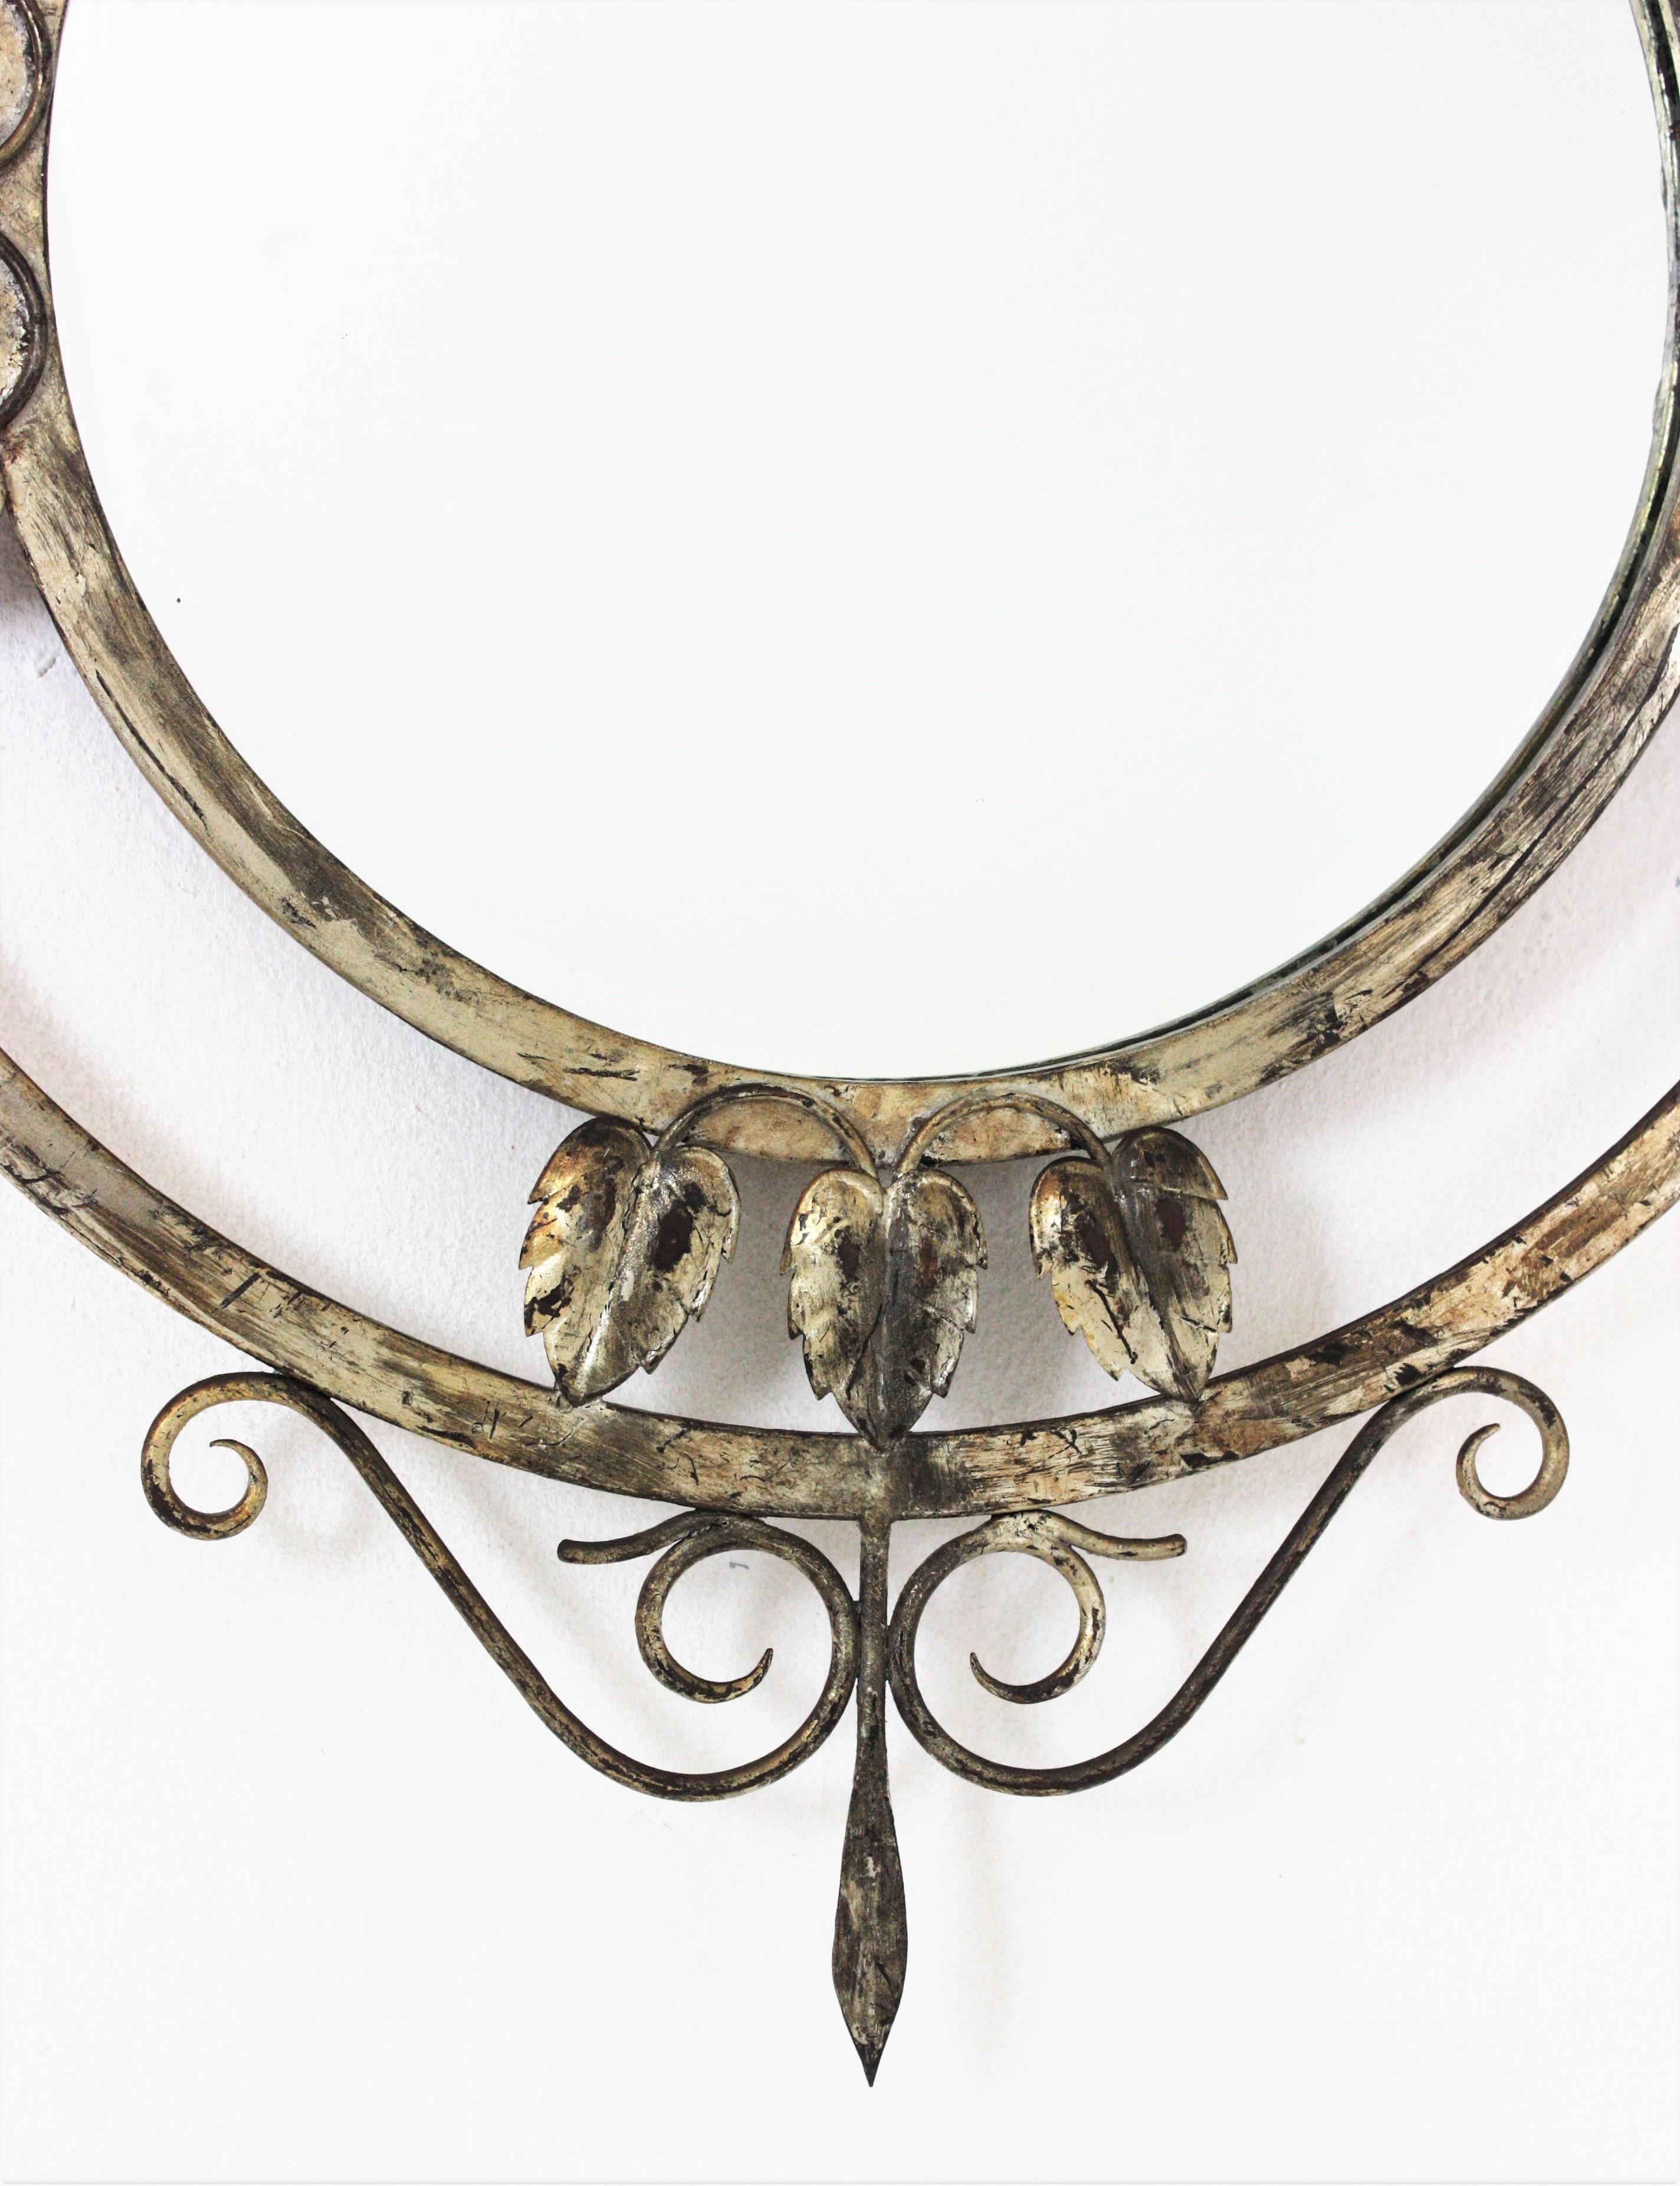 20th Century Gilt Silvered Wall Mirror with Foliage Details, Hand Forged Iron, France, 1940s For Sale